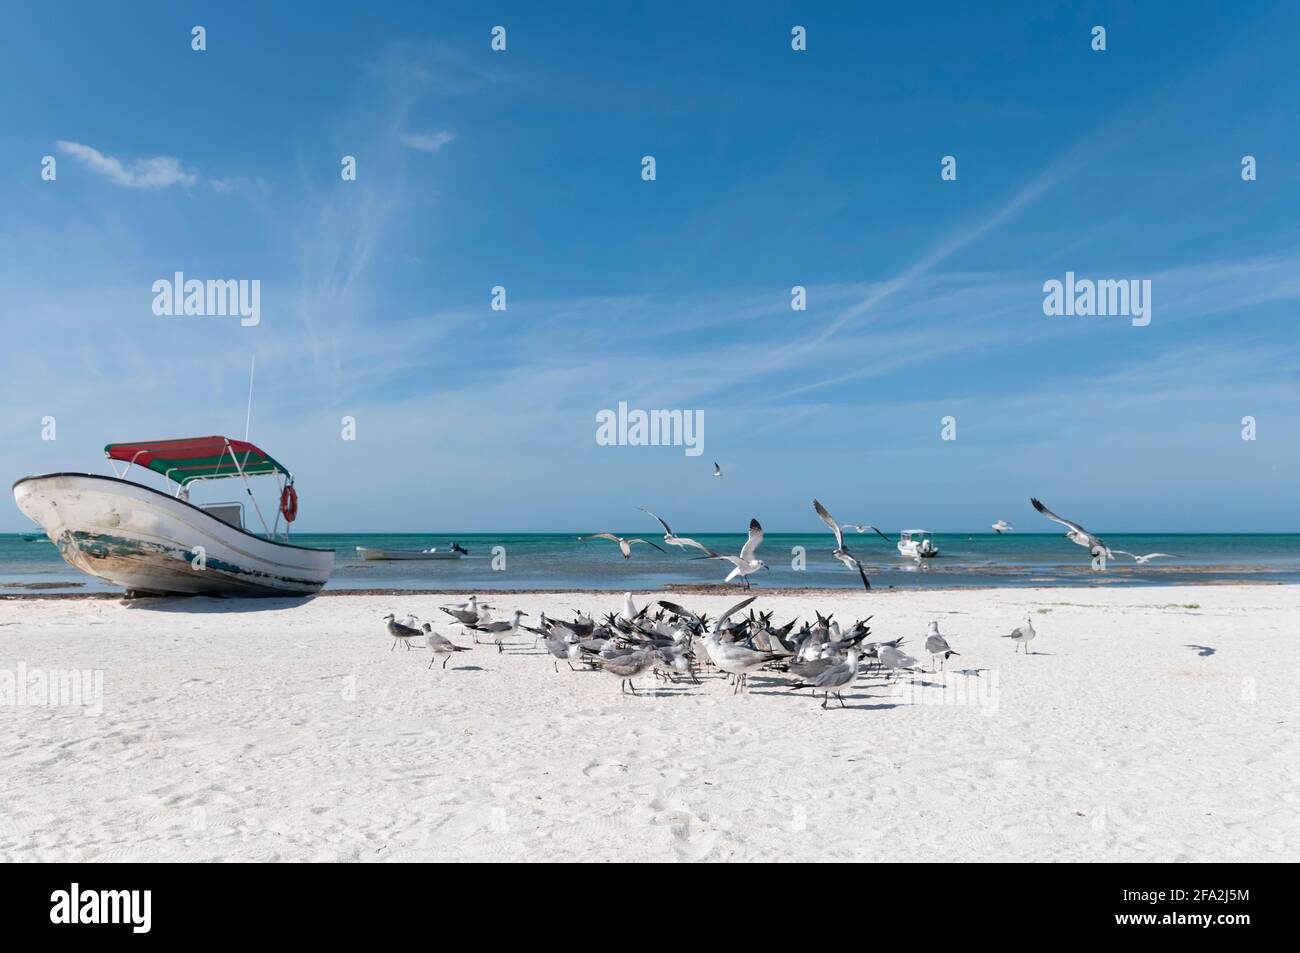 An old fishing boat on the sand of a tropical beach on Holbox Island in Mexico. In the background a group of seagulls and the Caribbean ocean. Concept Stock Photo